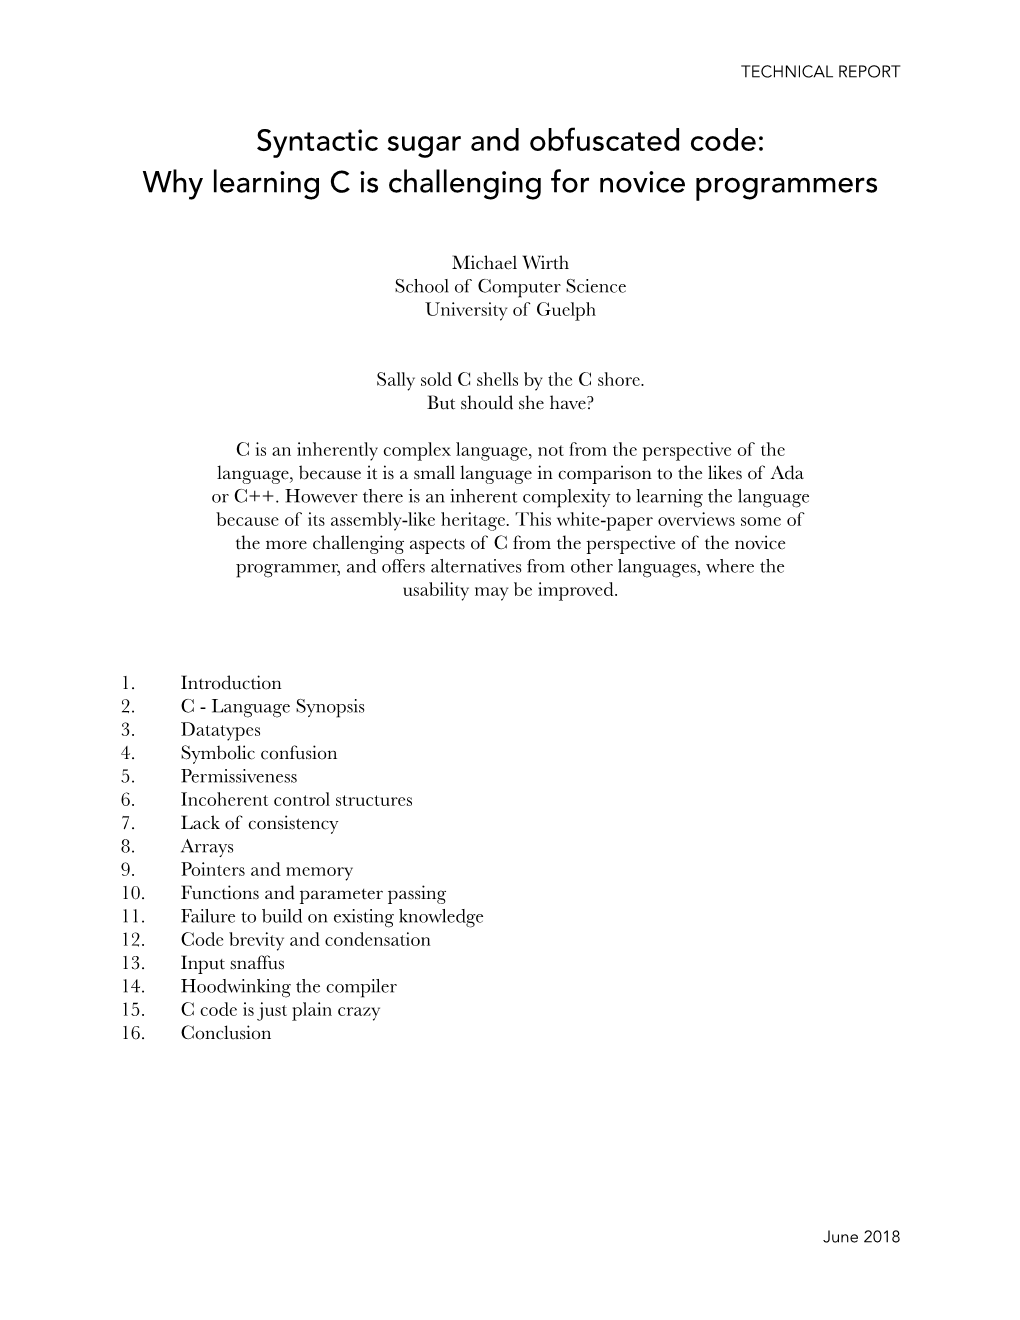 Syntactic Sugar and Obfuscated Code: Why Learning C Is Challenging for Novice Programmers